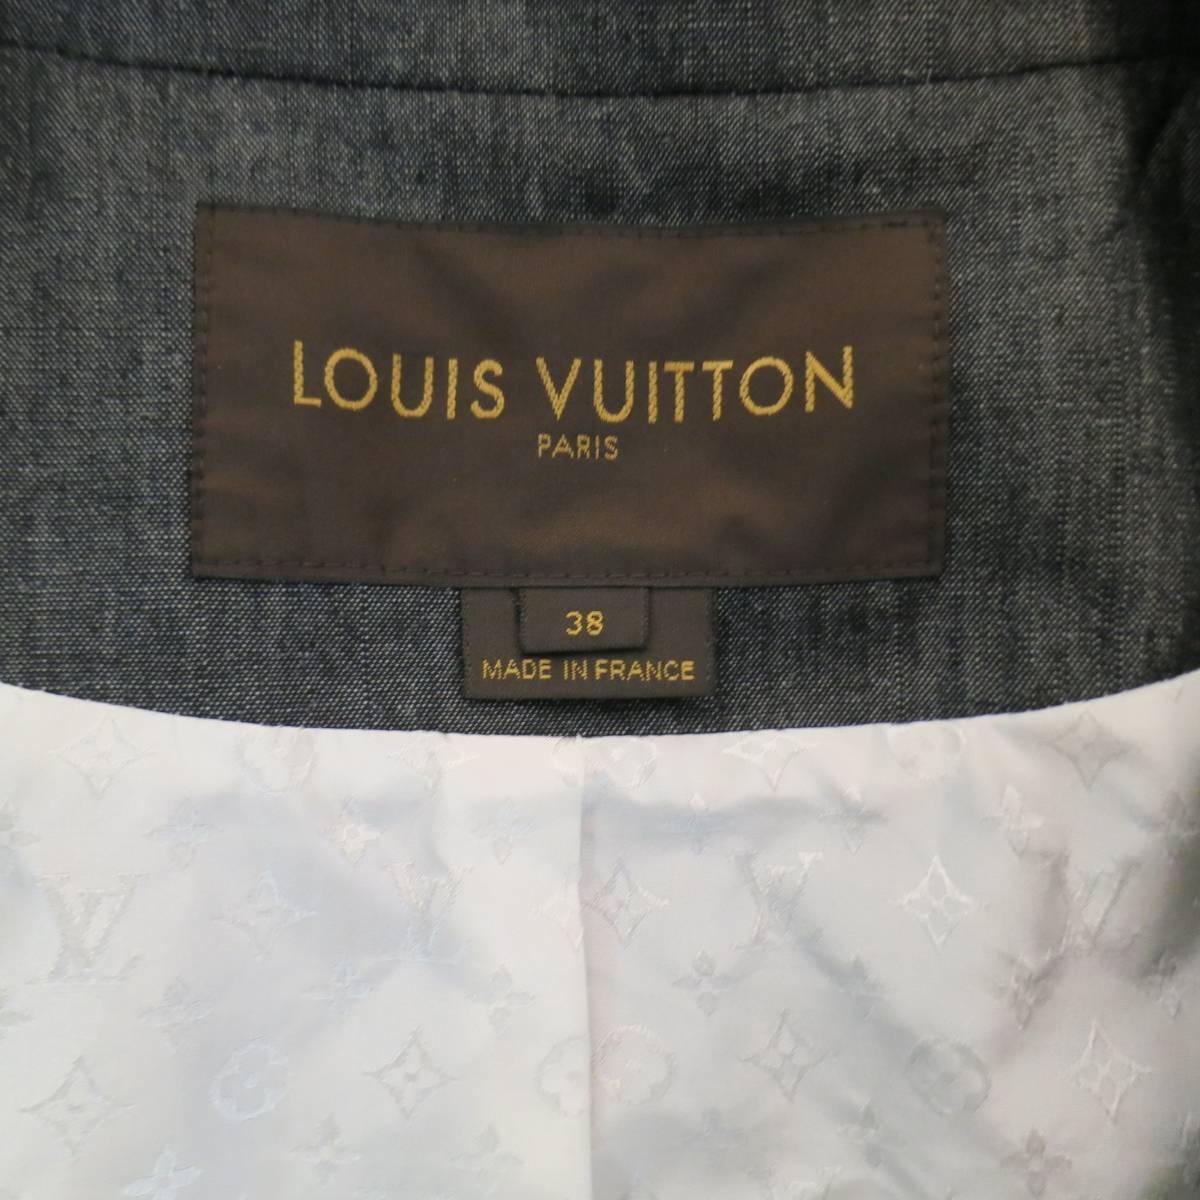 LOUIS VUITTON Jacket - Size 6 Navy Cotton / Ramie Ruched Sleeve Pleated Jacket 2